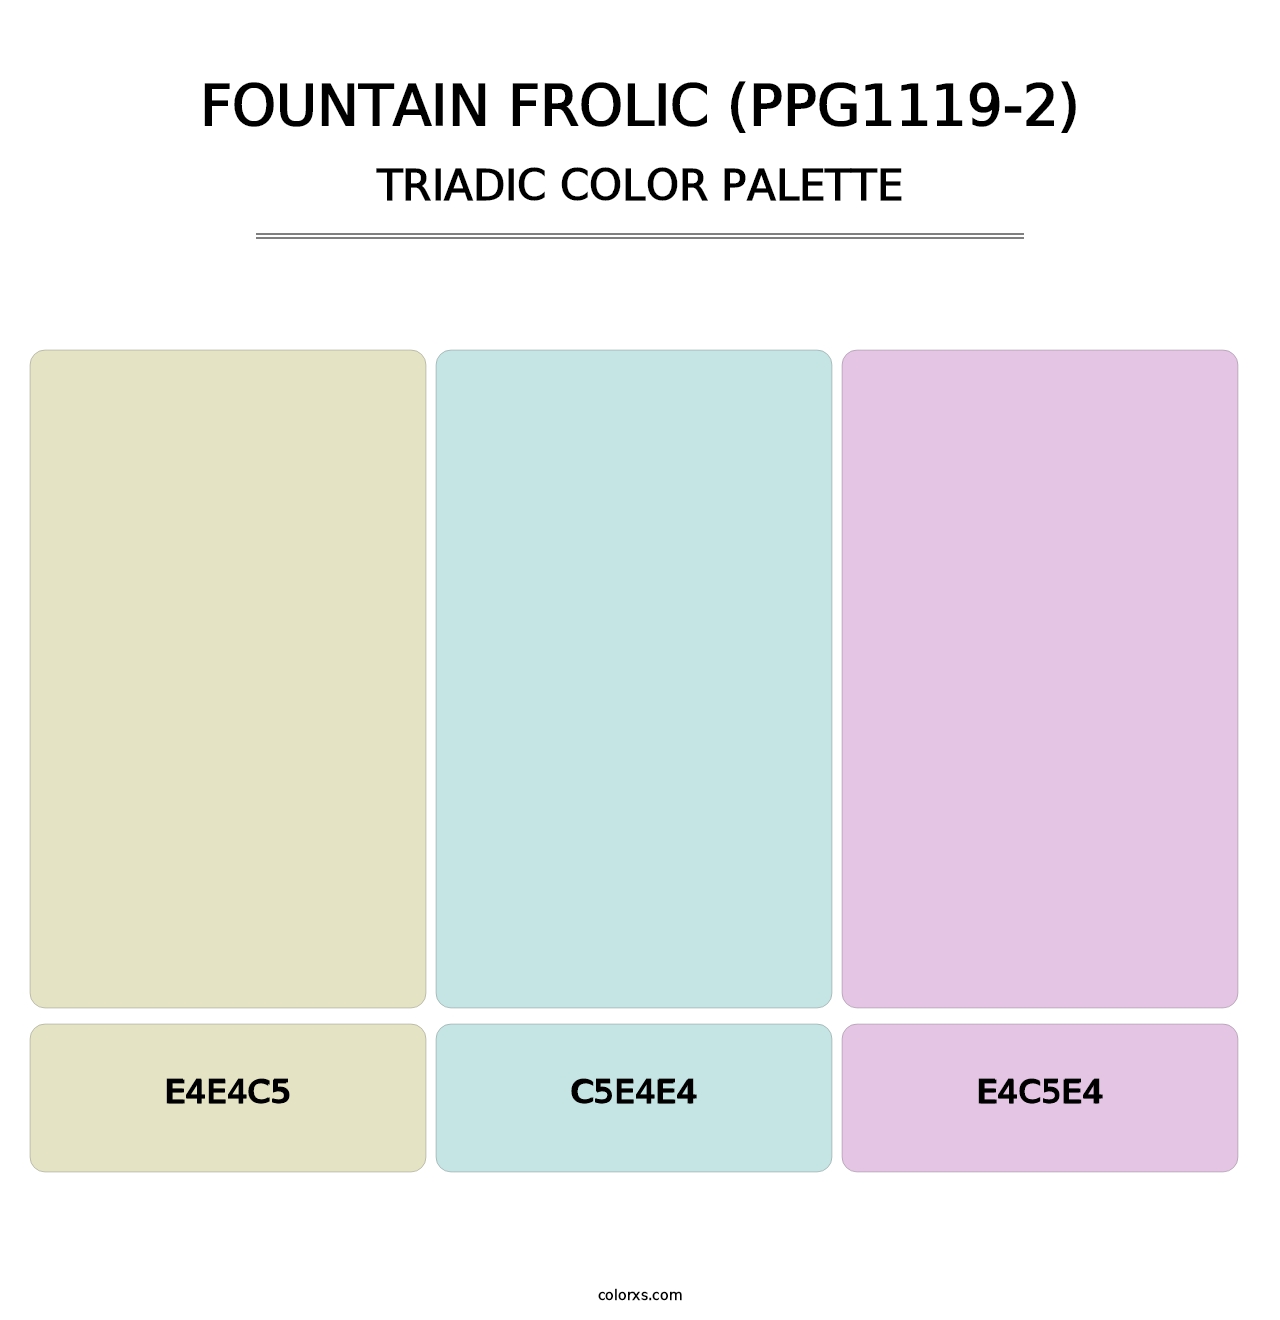 Fountain Frolic (PPG1119-2) - Triadic Color Palette